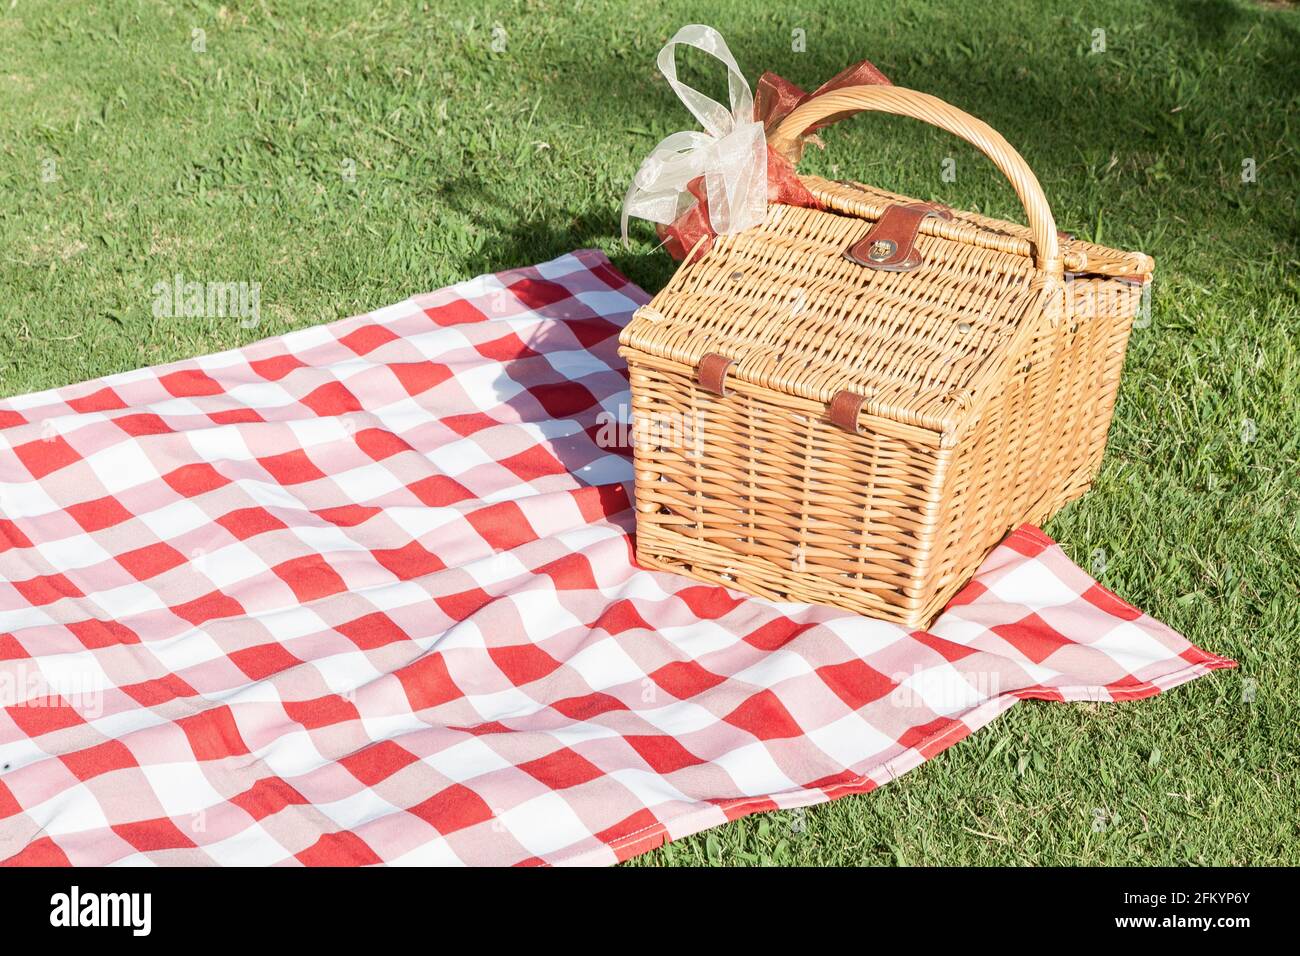 Food and drinks picnic on rustic wooden table with checkered tablecloth  Stock Photo - Alamy